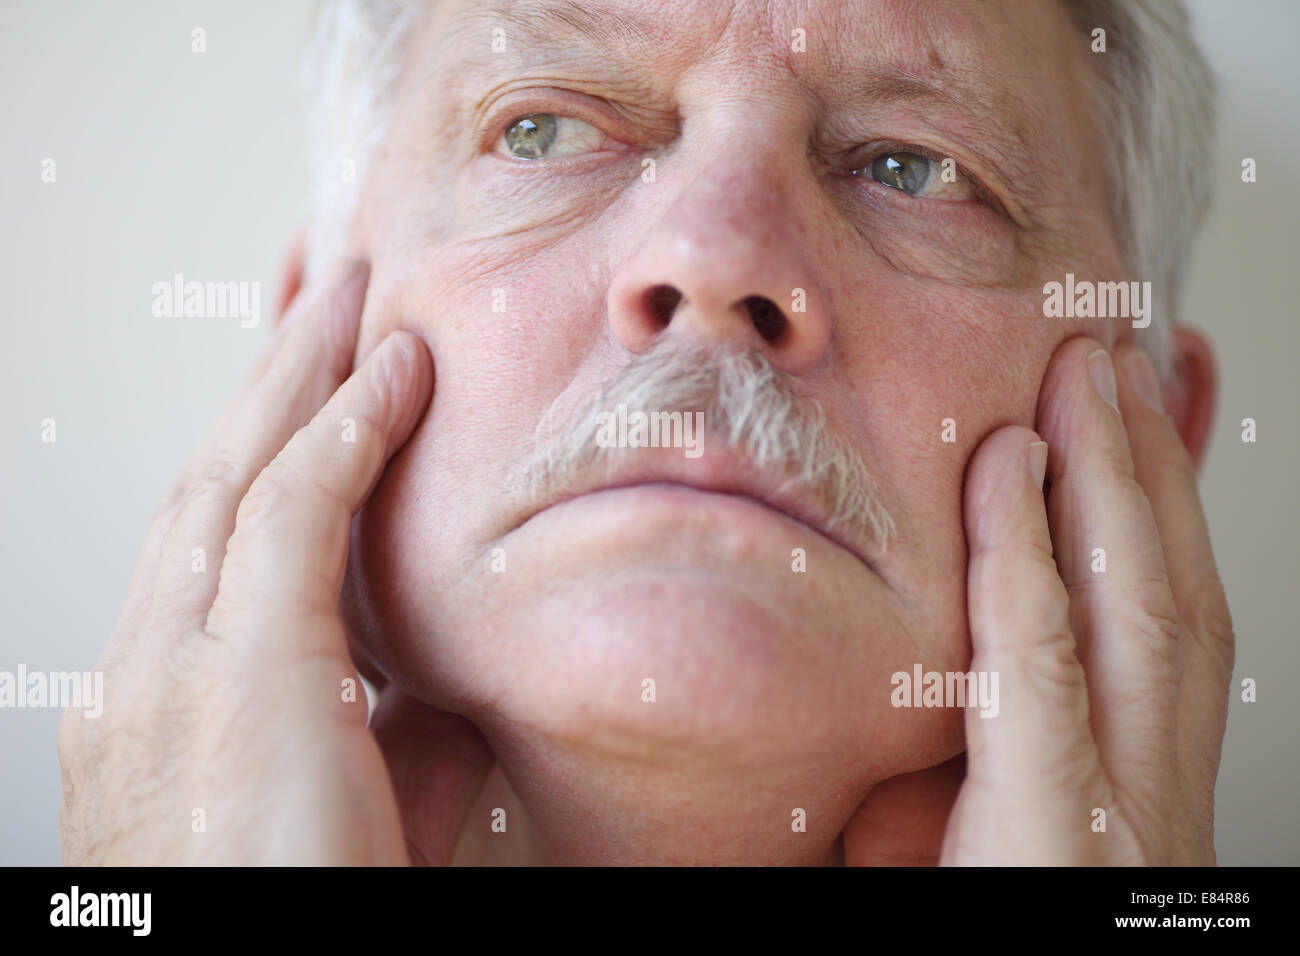 An older man has his hands on his cheeks and a thoughtful expression. Stock Photo